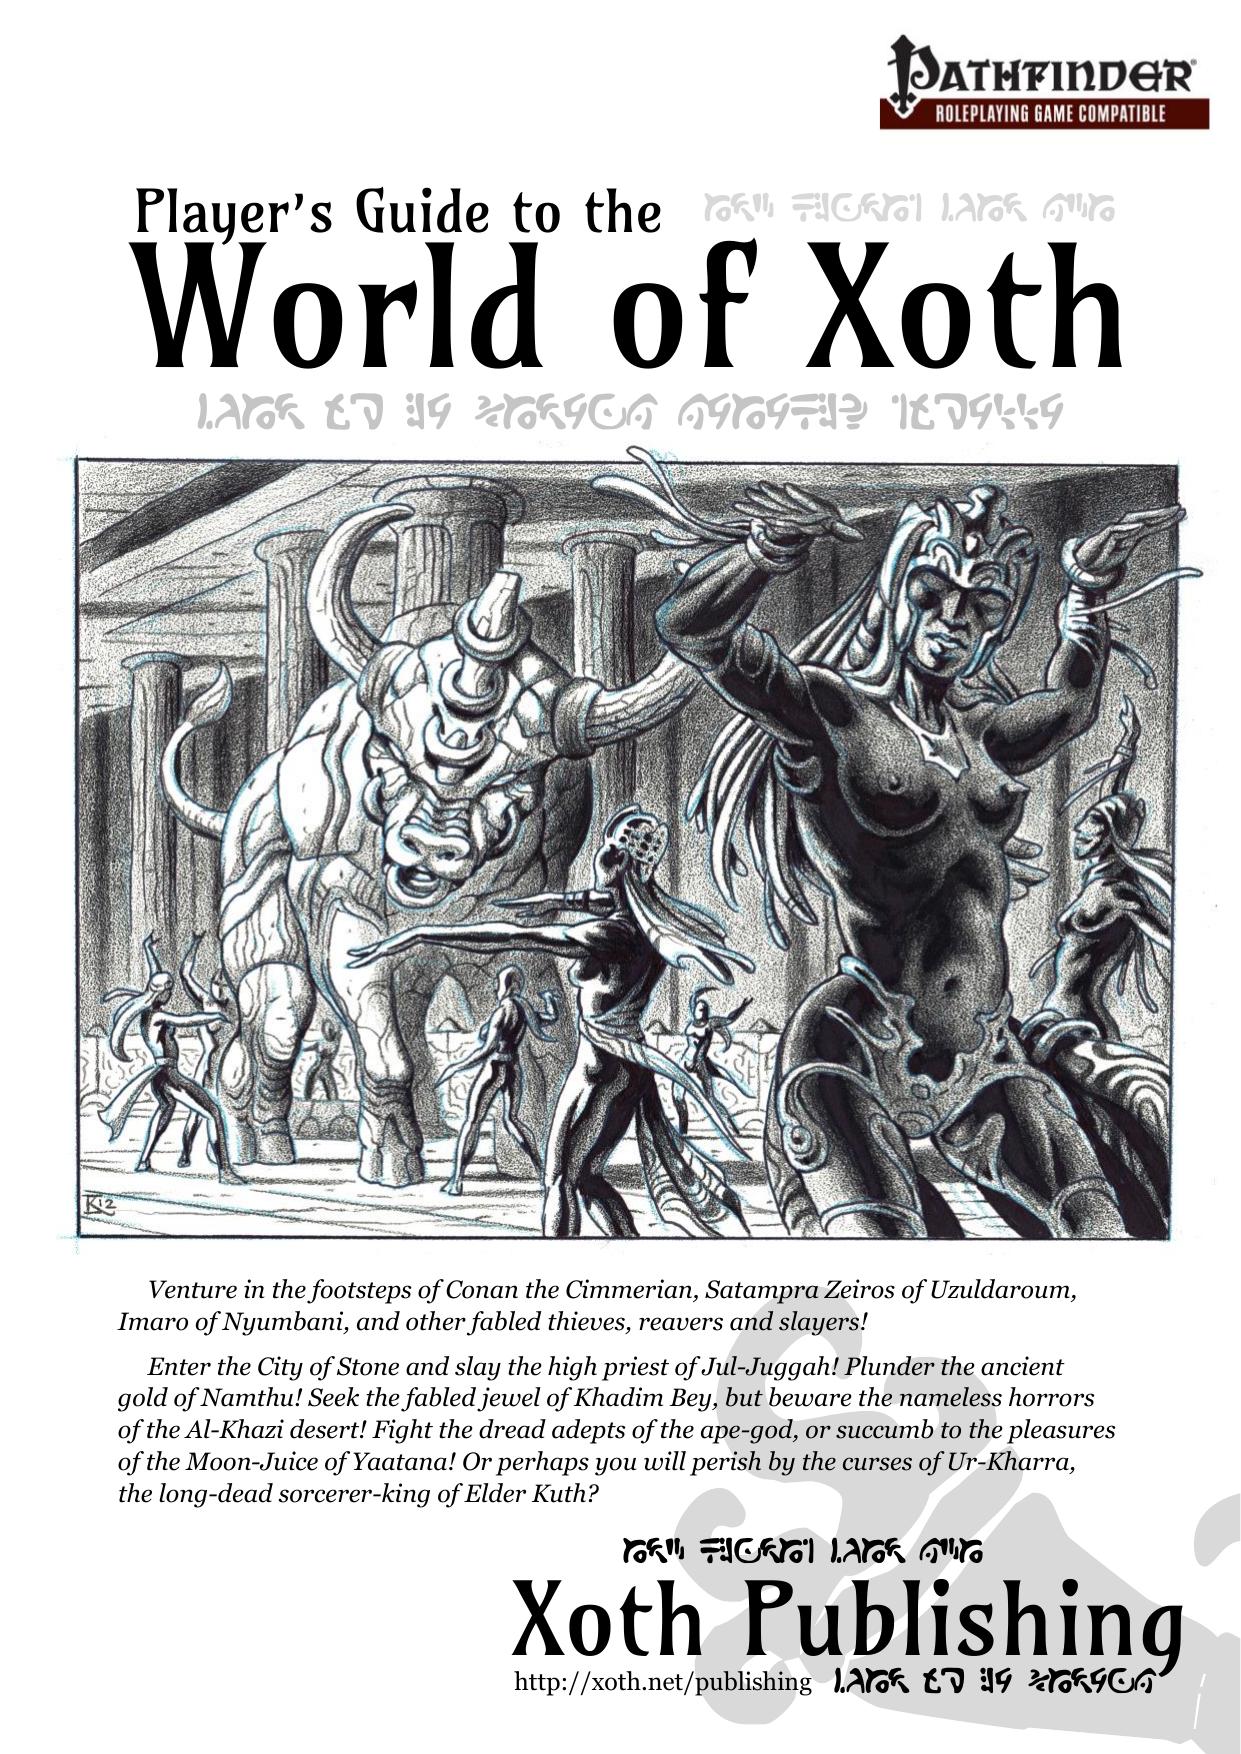 World of Xoth Players Guide for Pathfinder